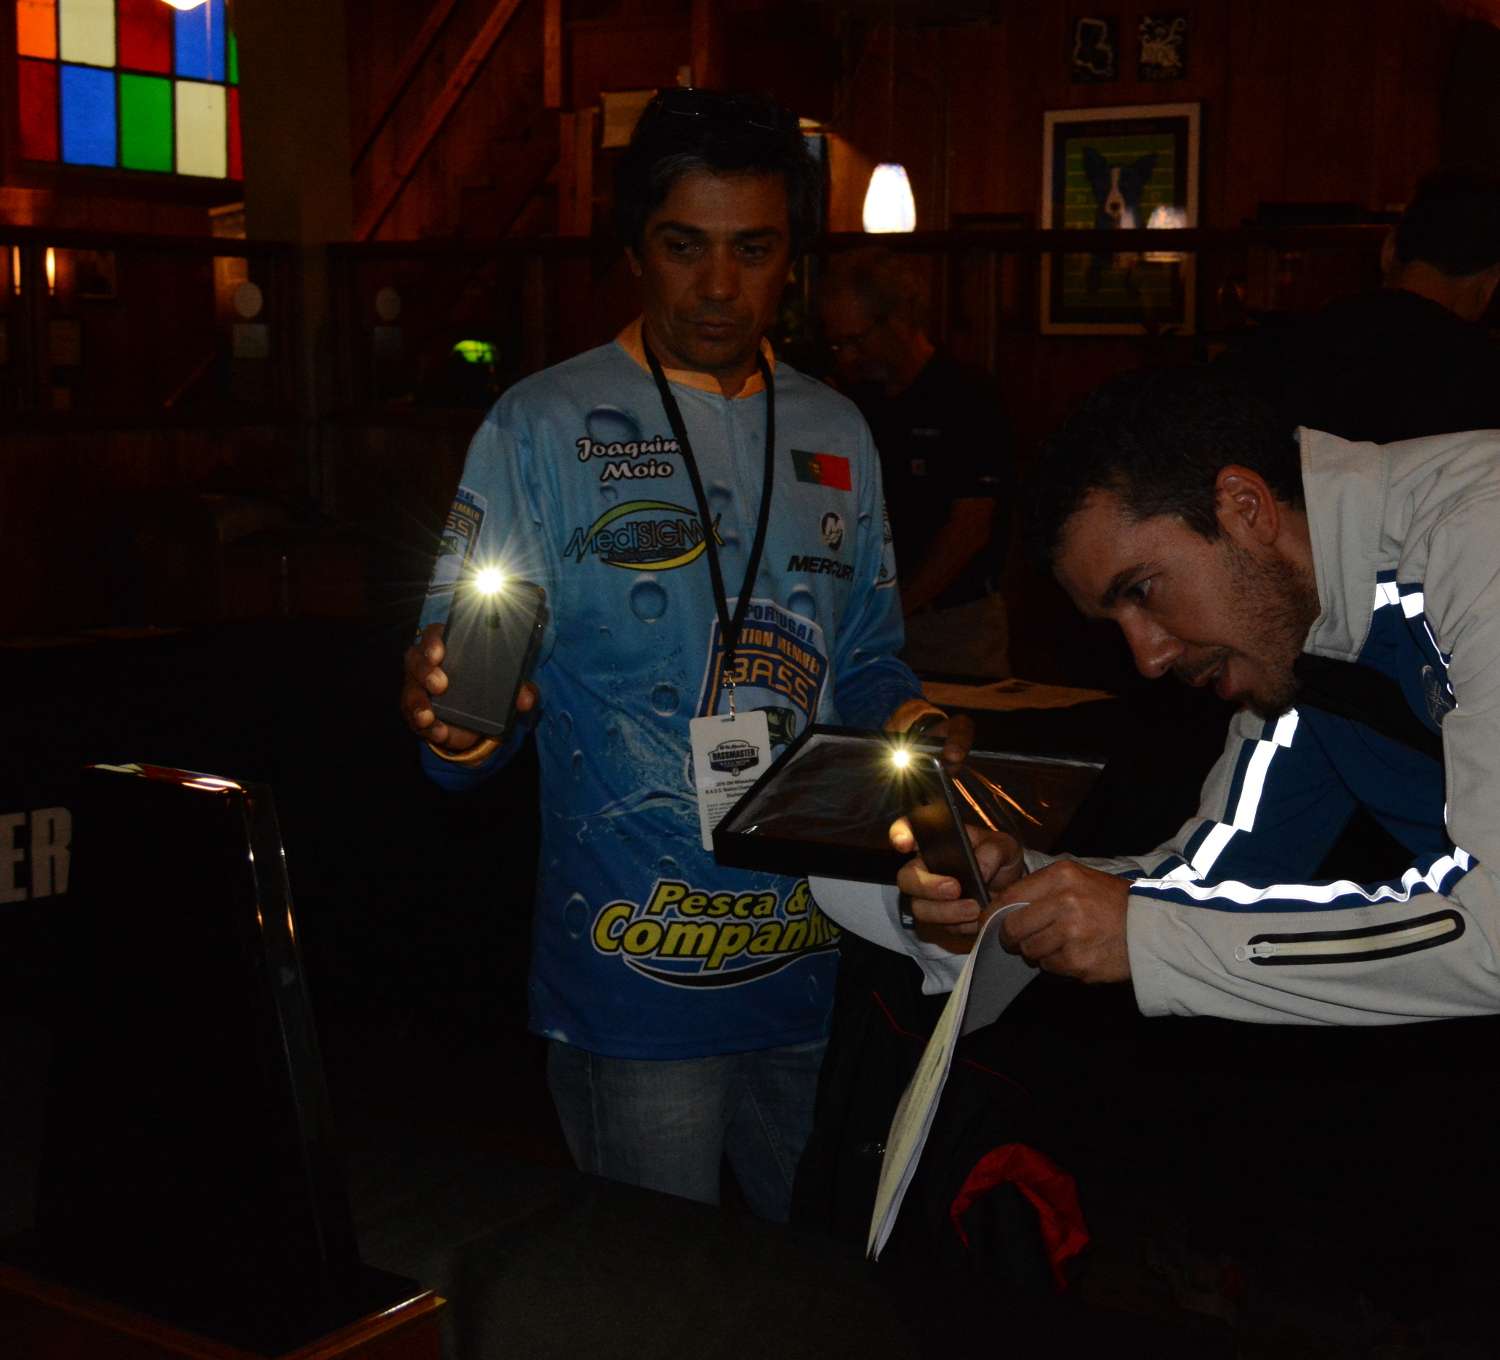 Joaquim Moio and Jose Moreira of Portugal pull out their cell phones to take photos of the championship trophy.